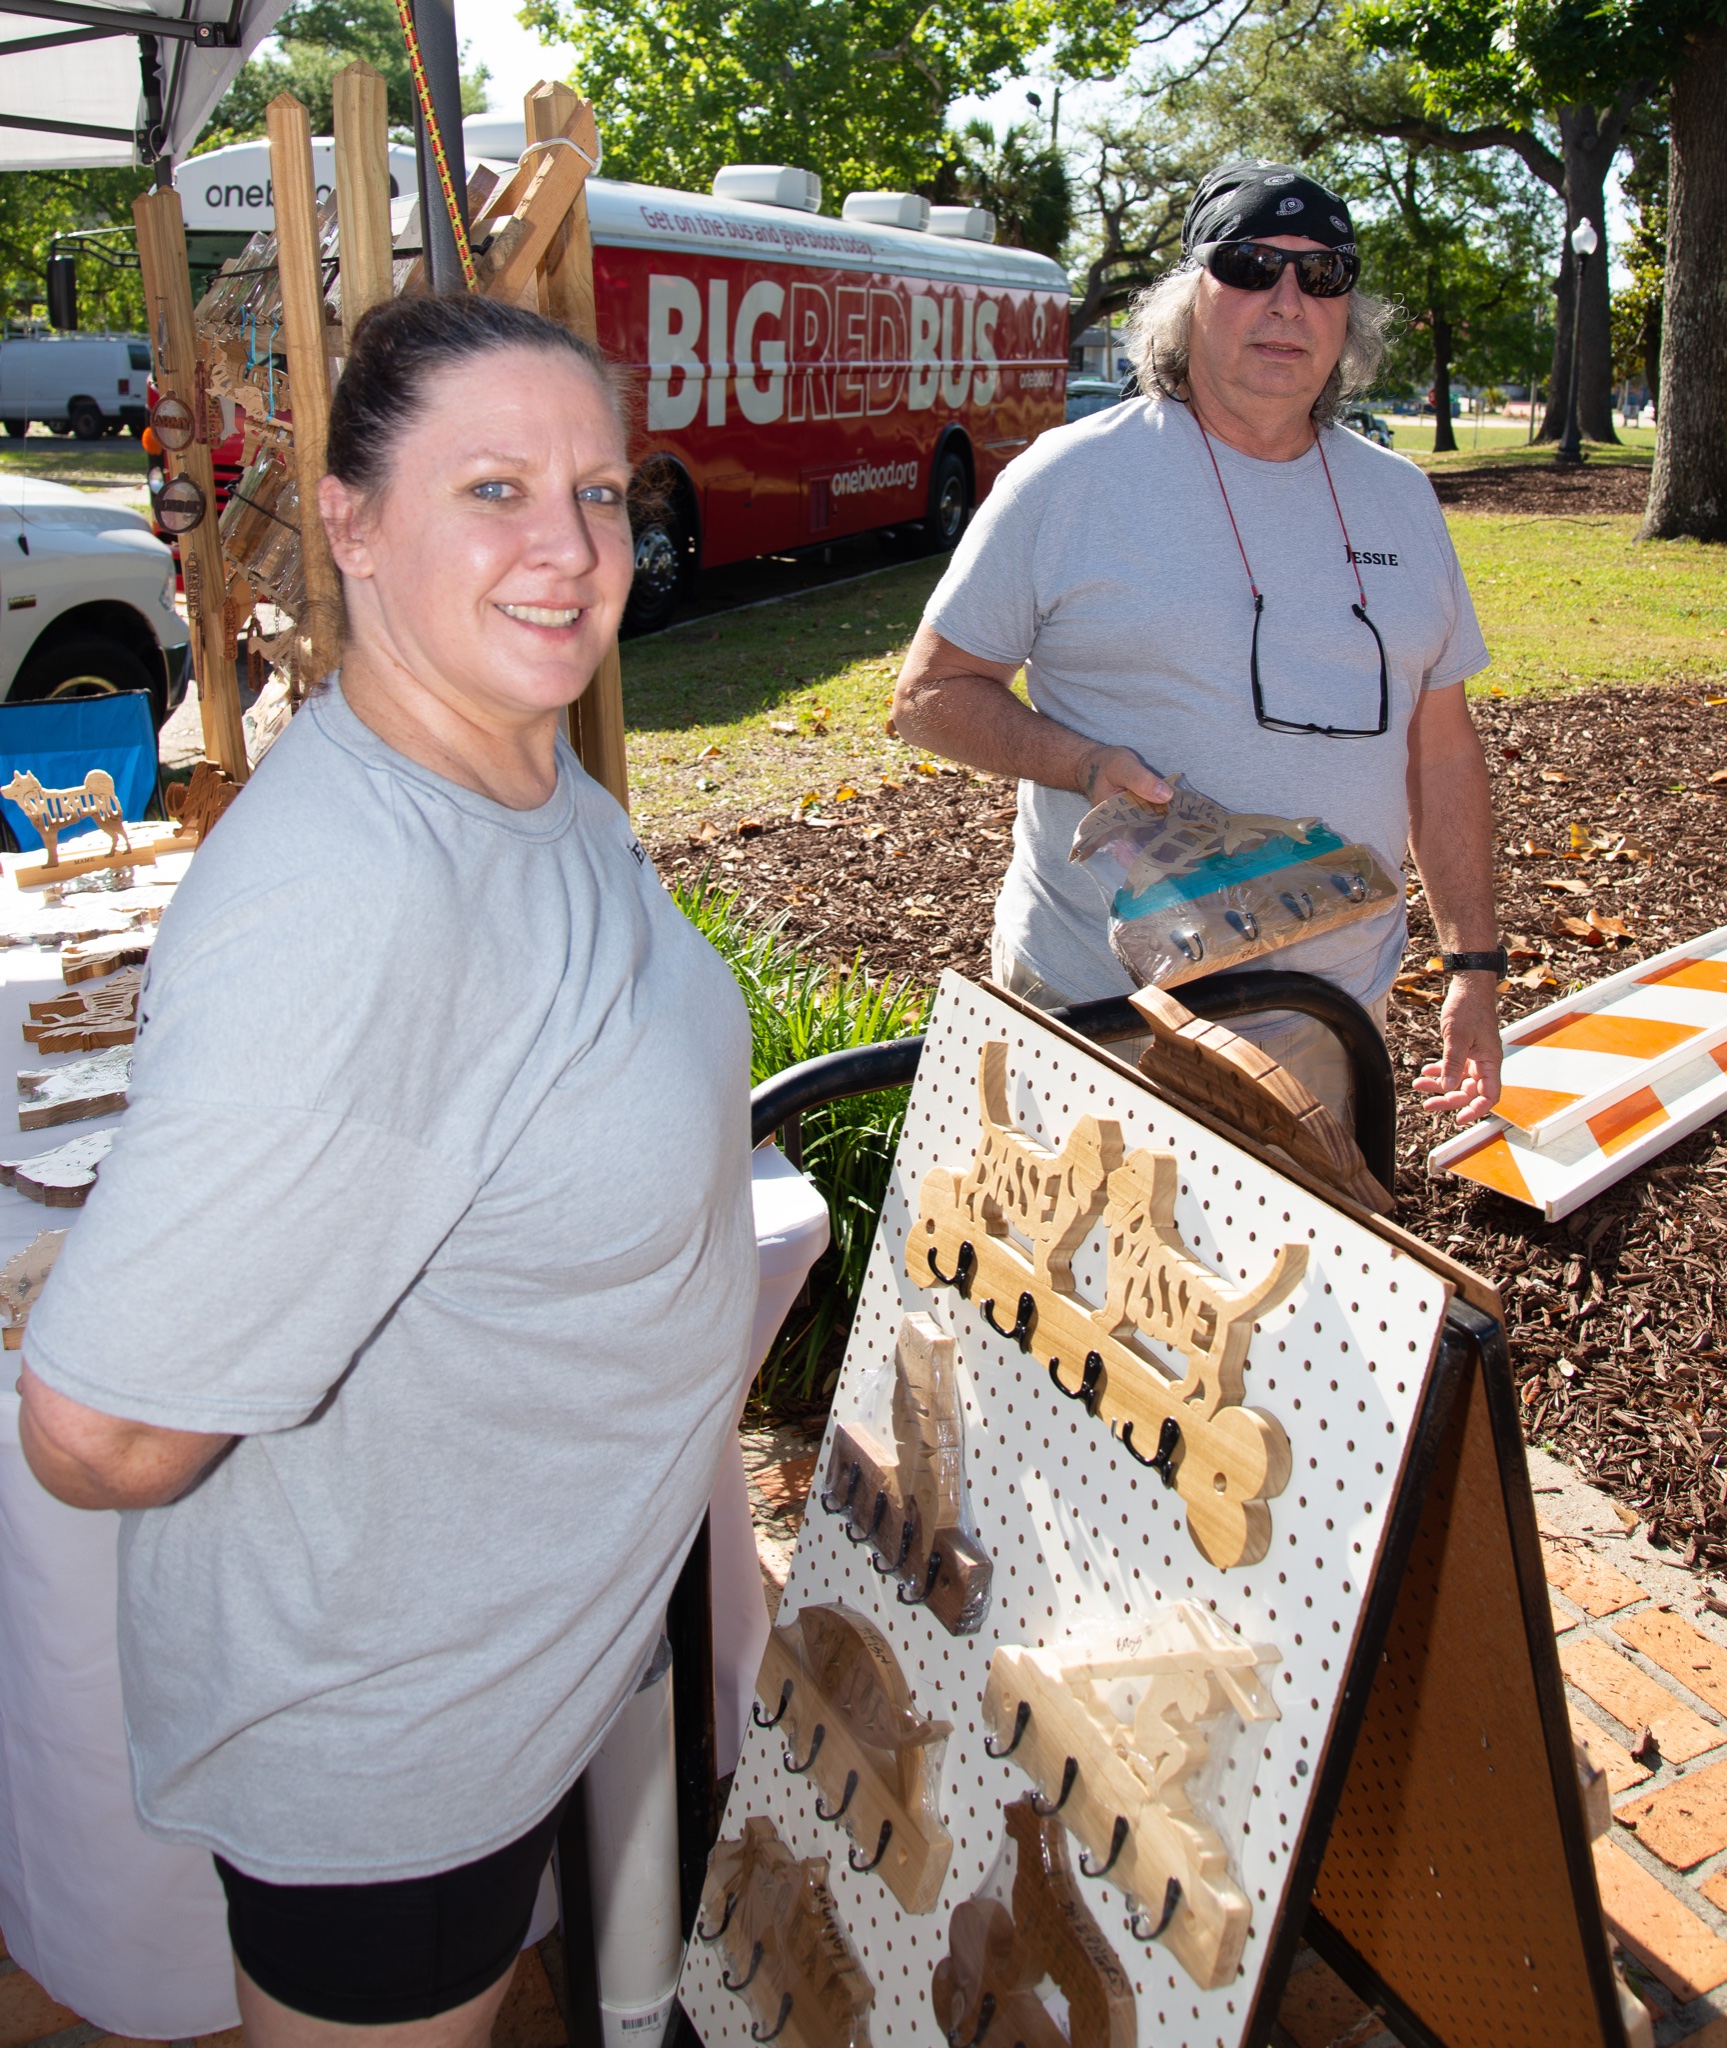 The  Panama City Farmers Market | J and J Woodables Upcoming Event Calendar